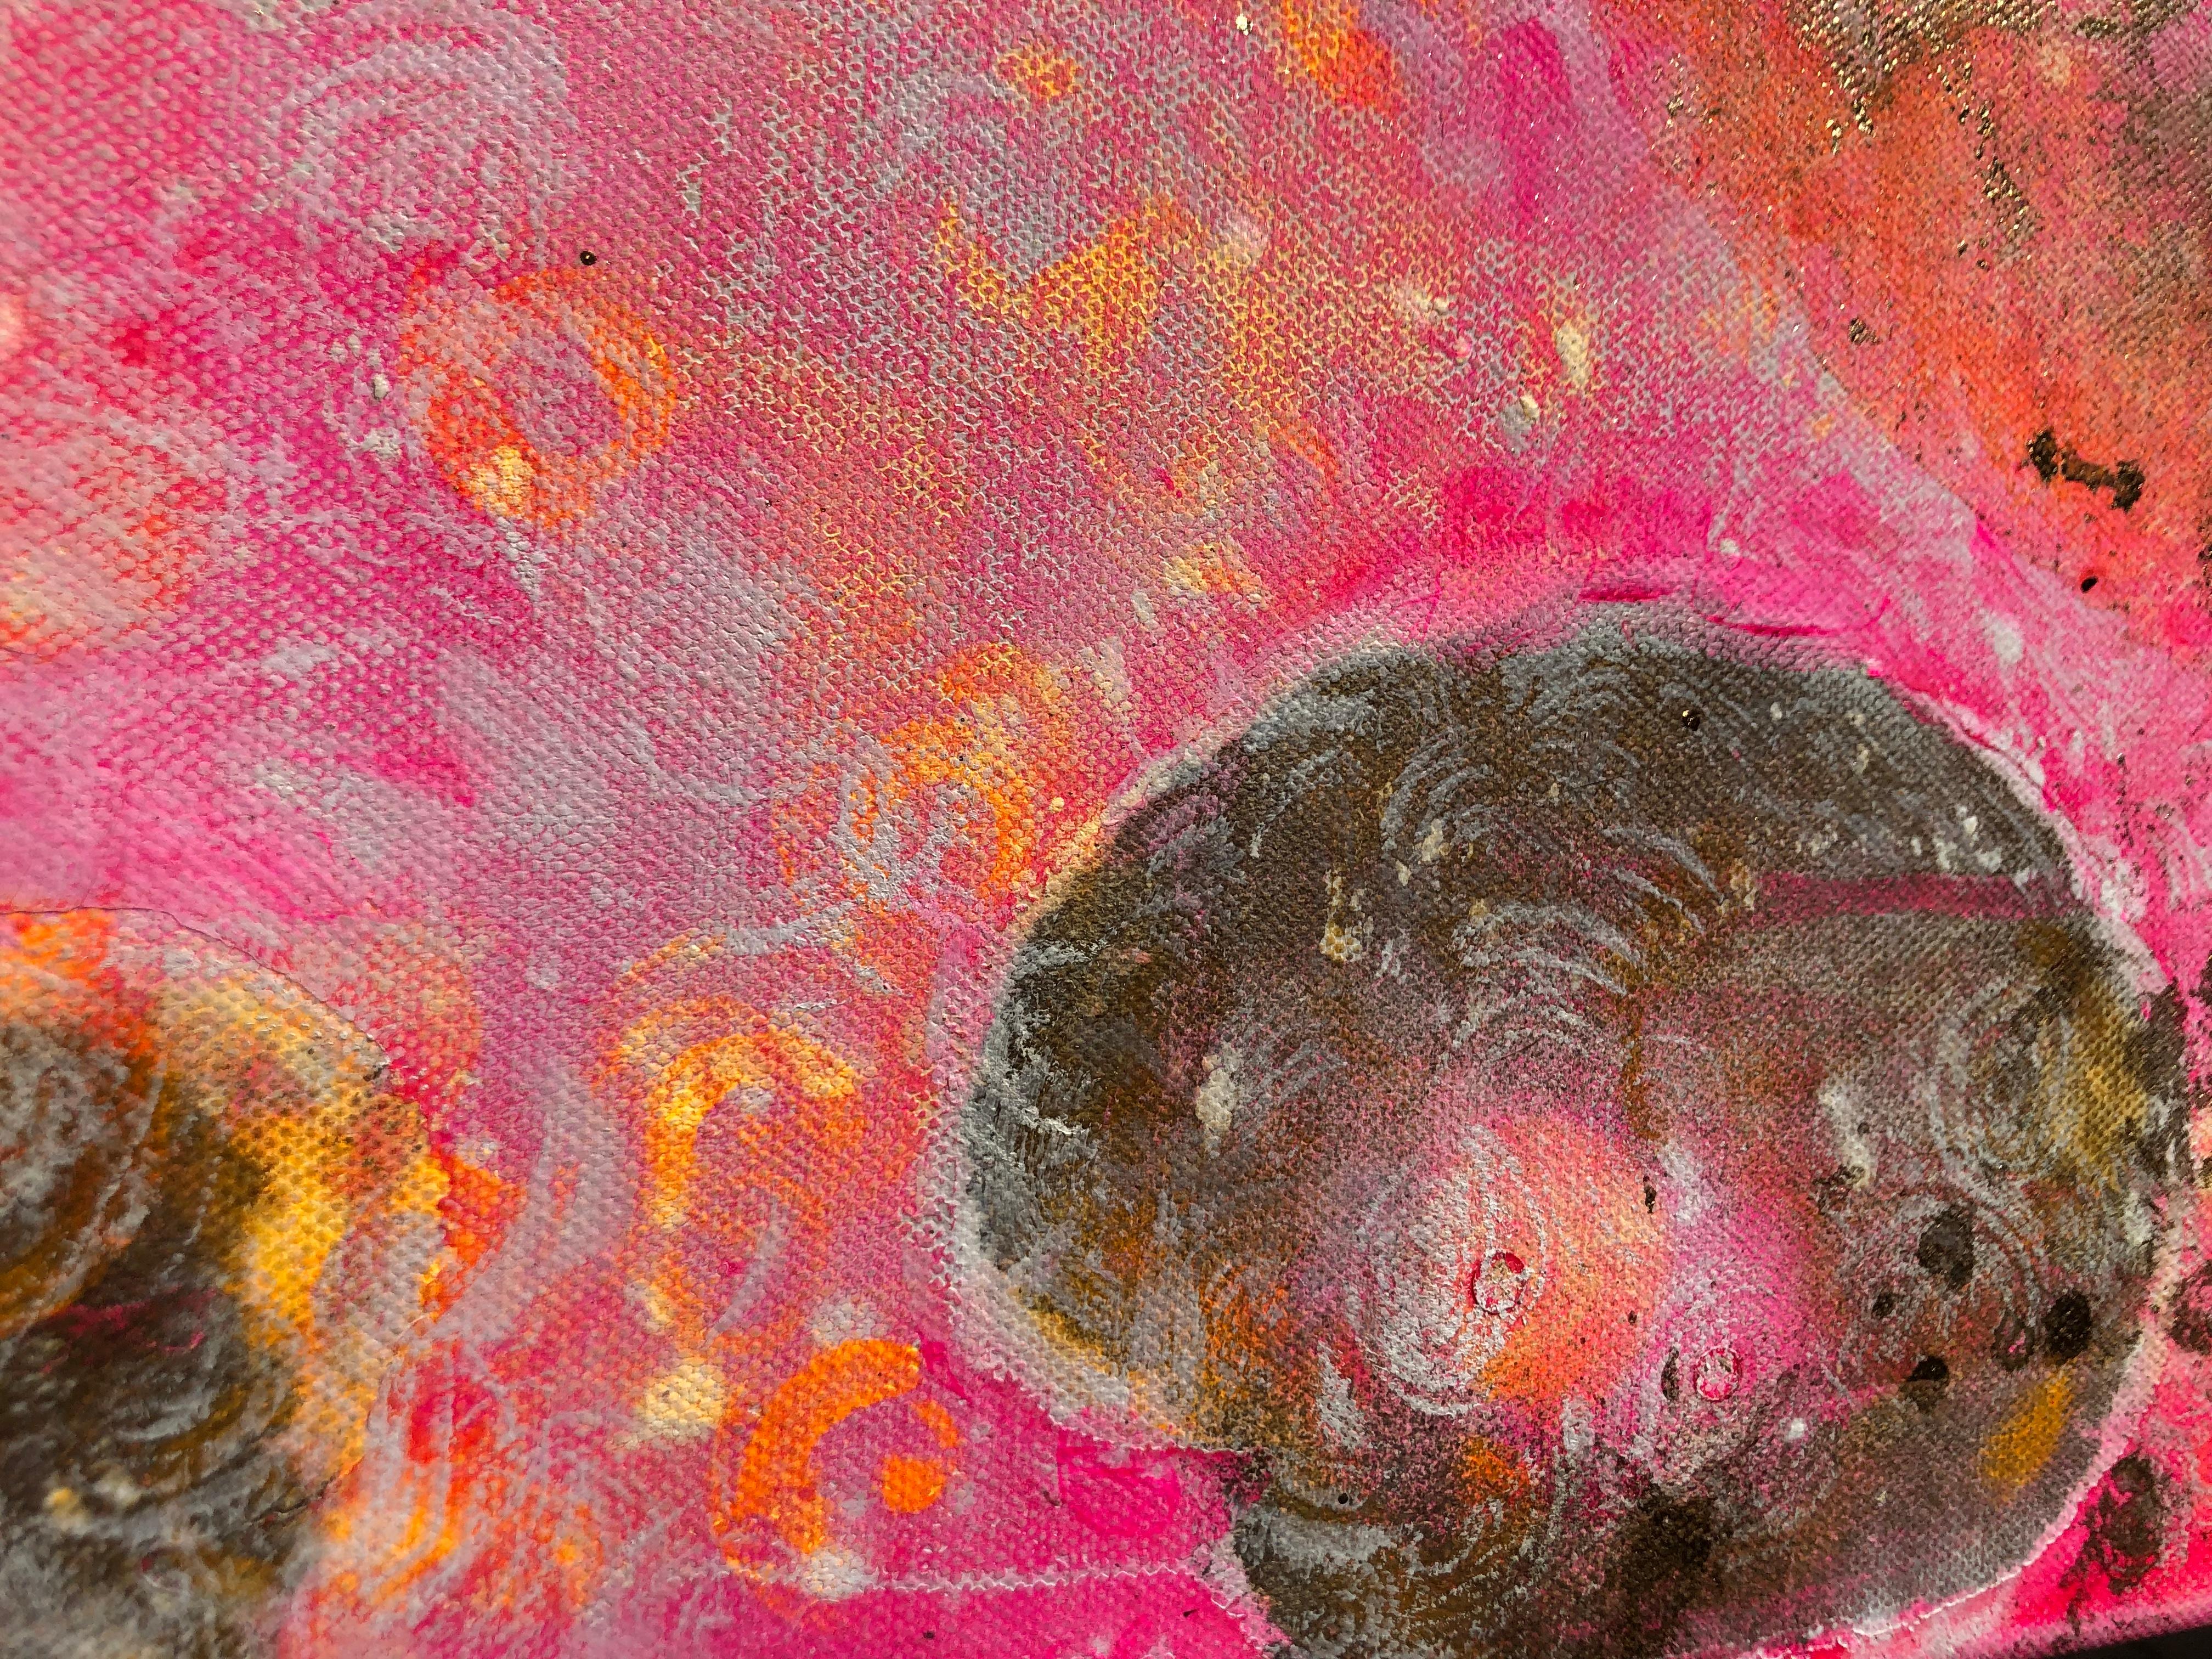 Morning levitation 3 - Painting on canvas, abstract metaphysical, gold, pink im Angebot 3